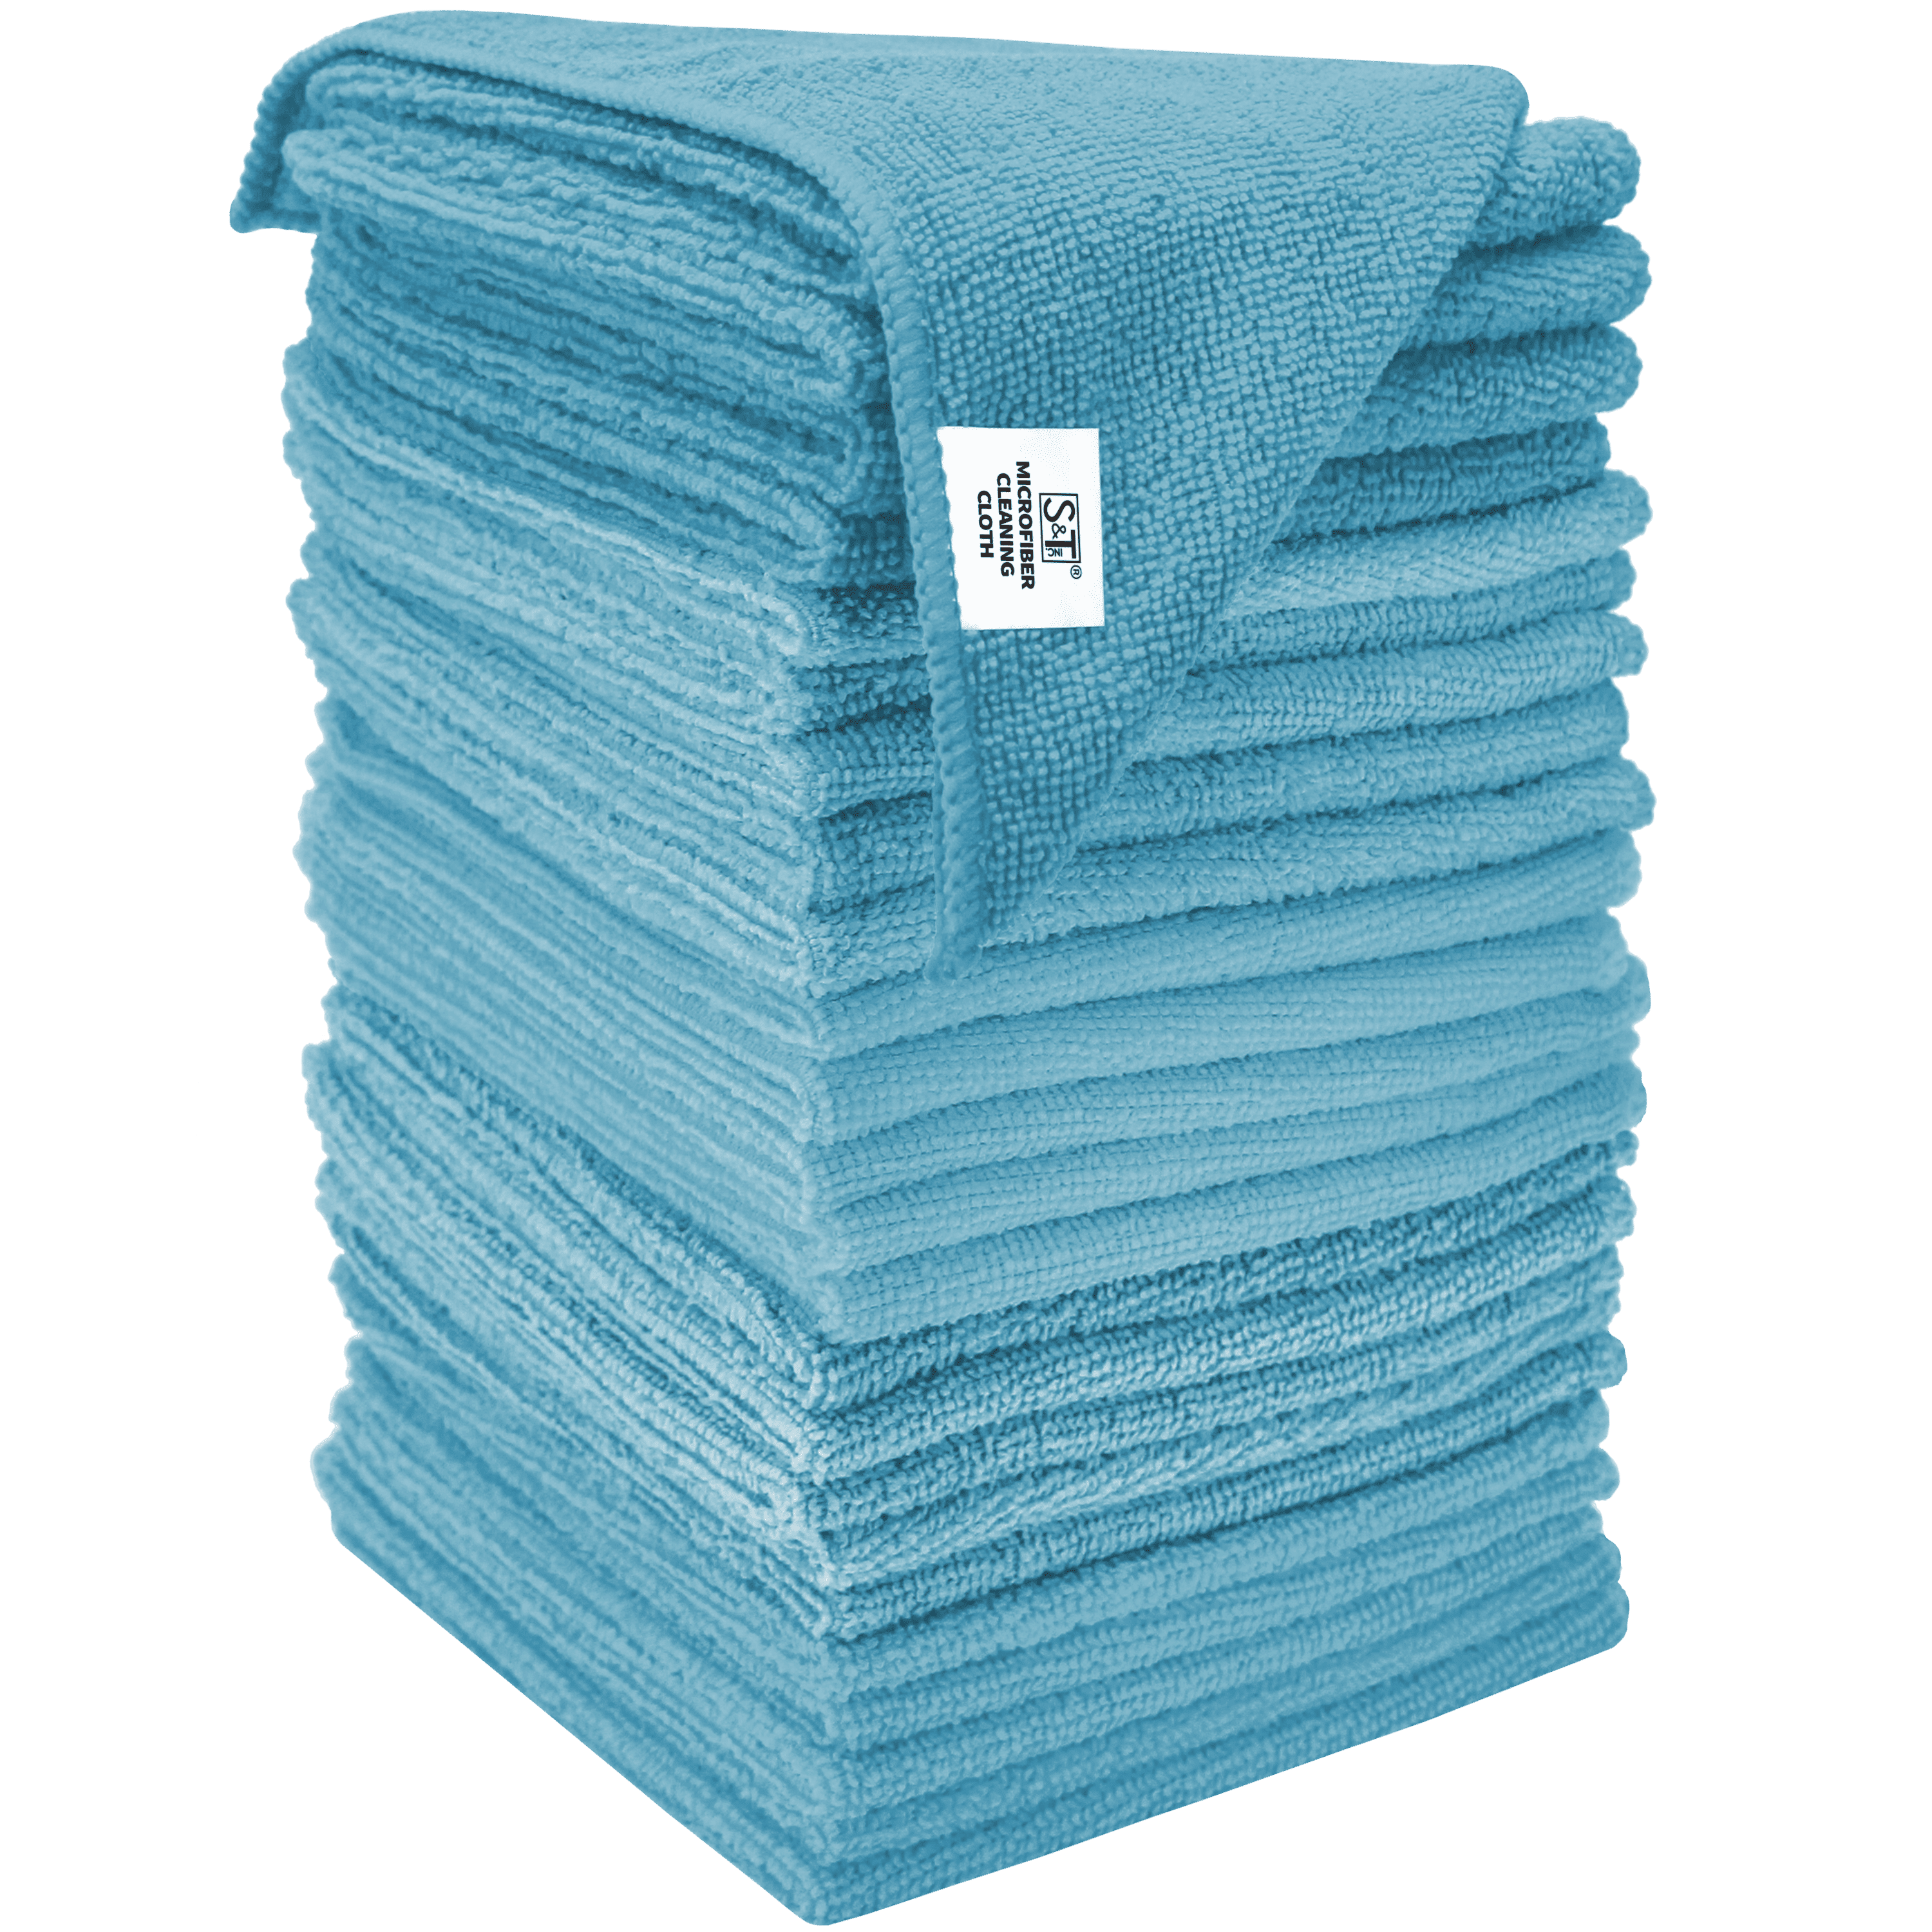 15 x 24" Microfiber Towels w/FREE Shipping & Volume Pricing Pack of 3 Large 